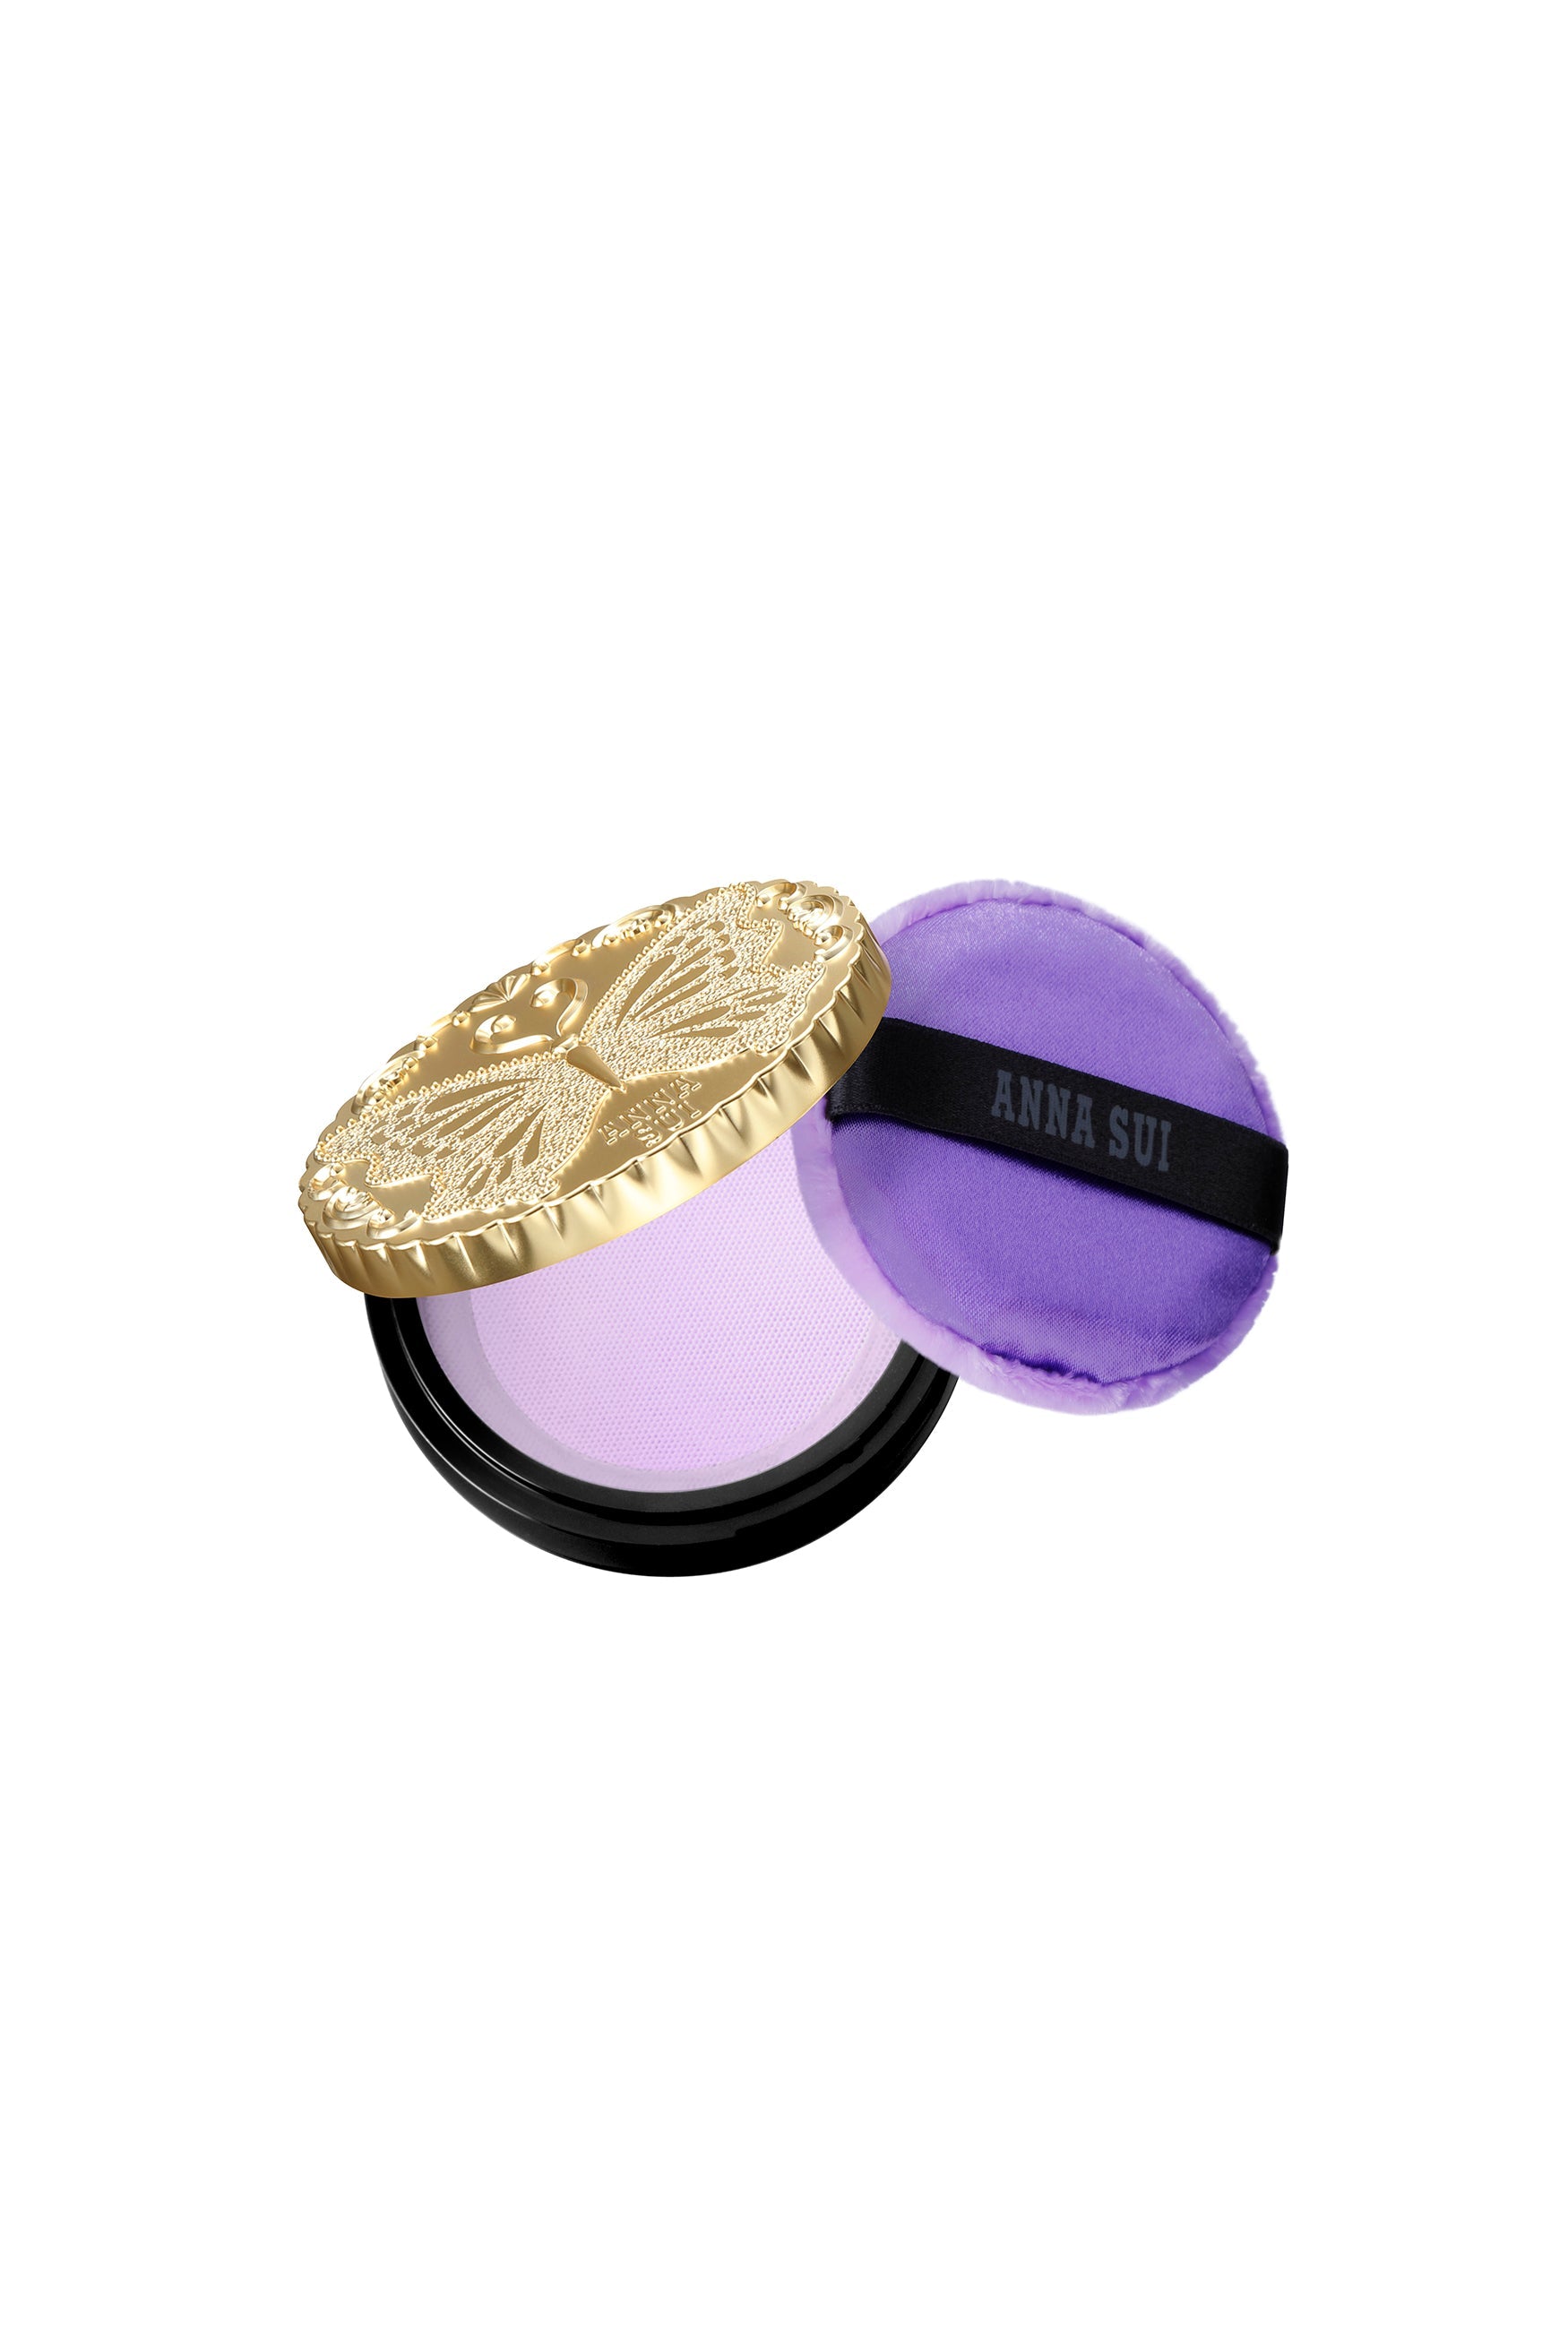 The Classic Loose Powder is a gold round box with a butterfly engrave on top, with CASE + 200: powder, and sponge.